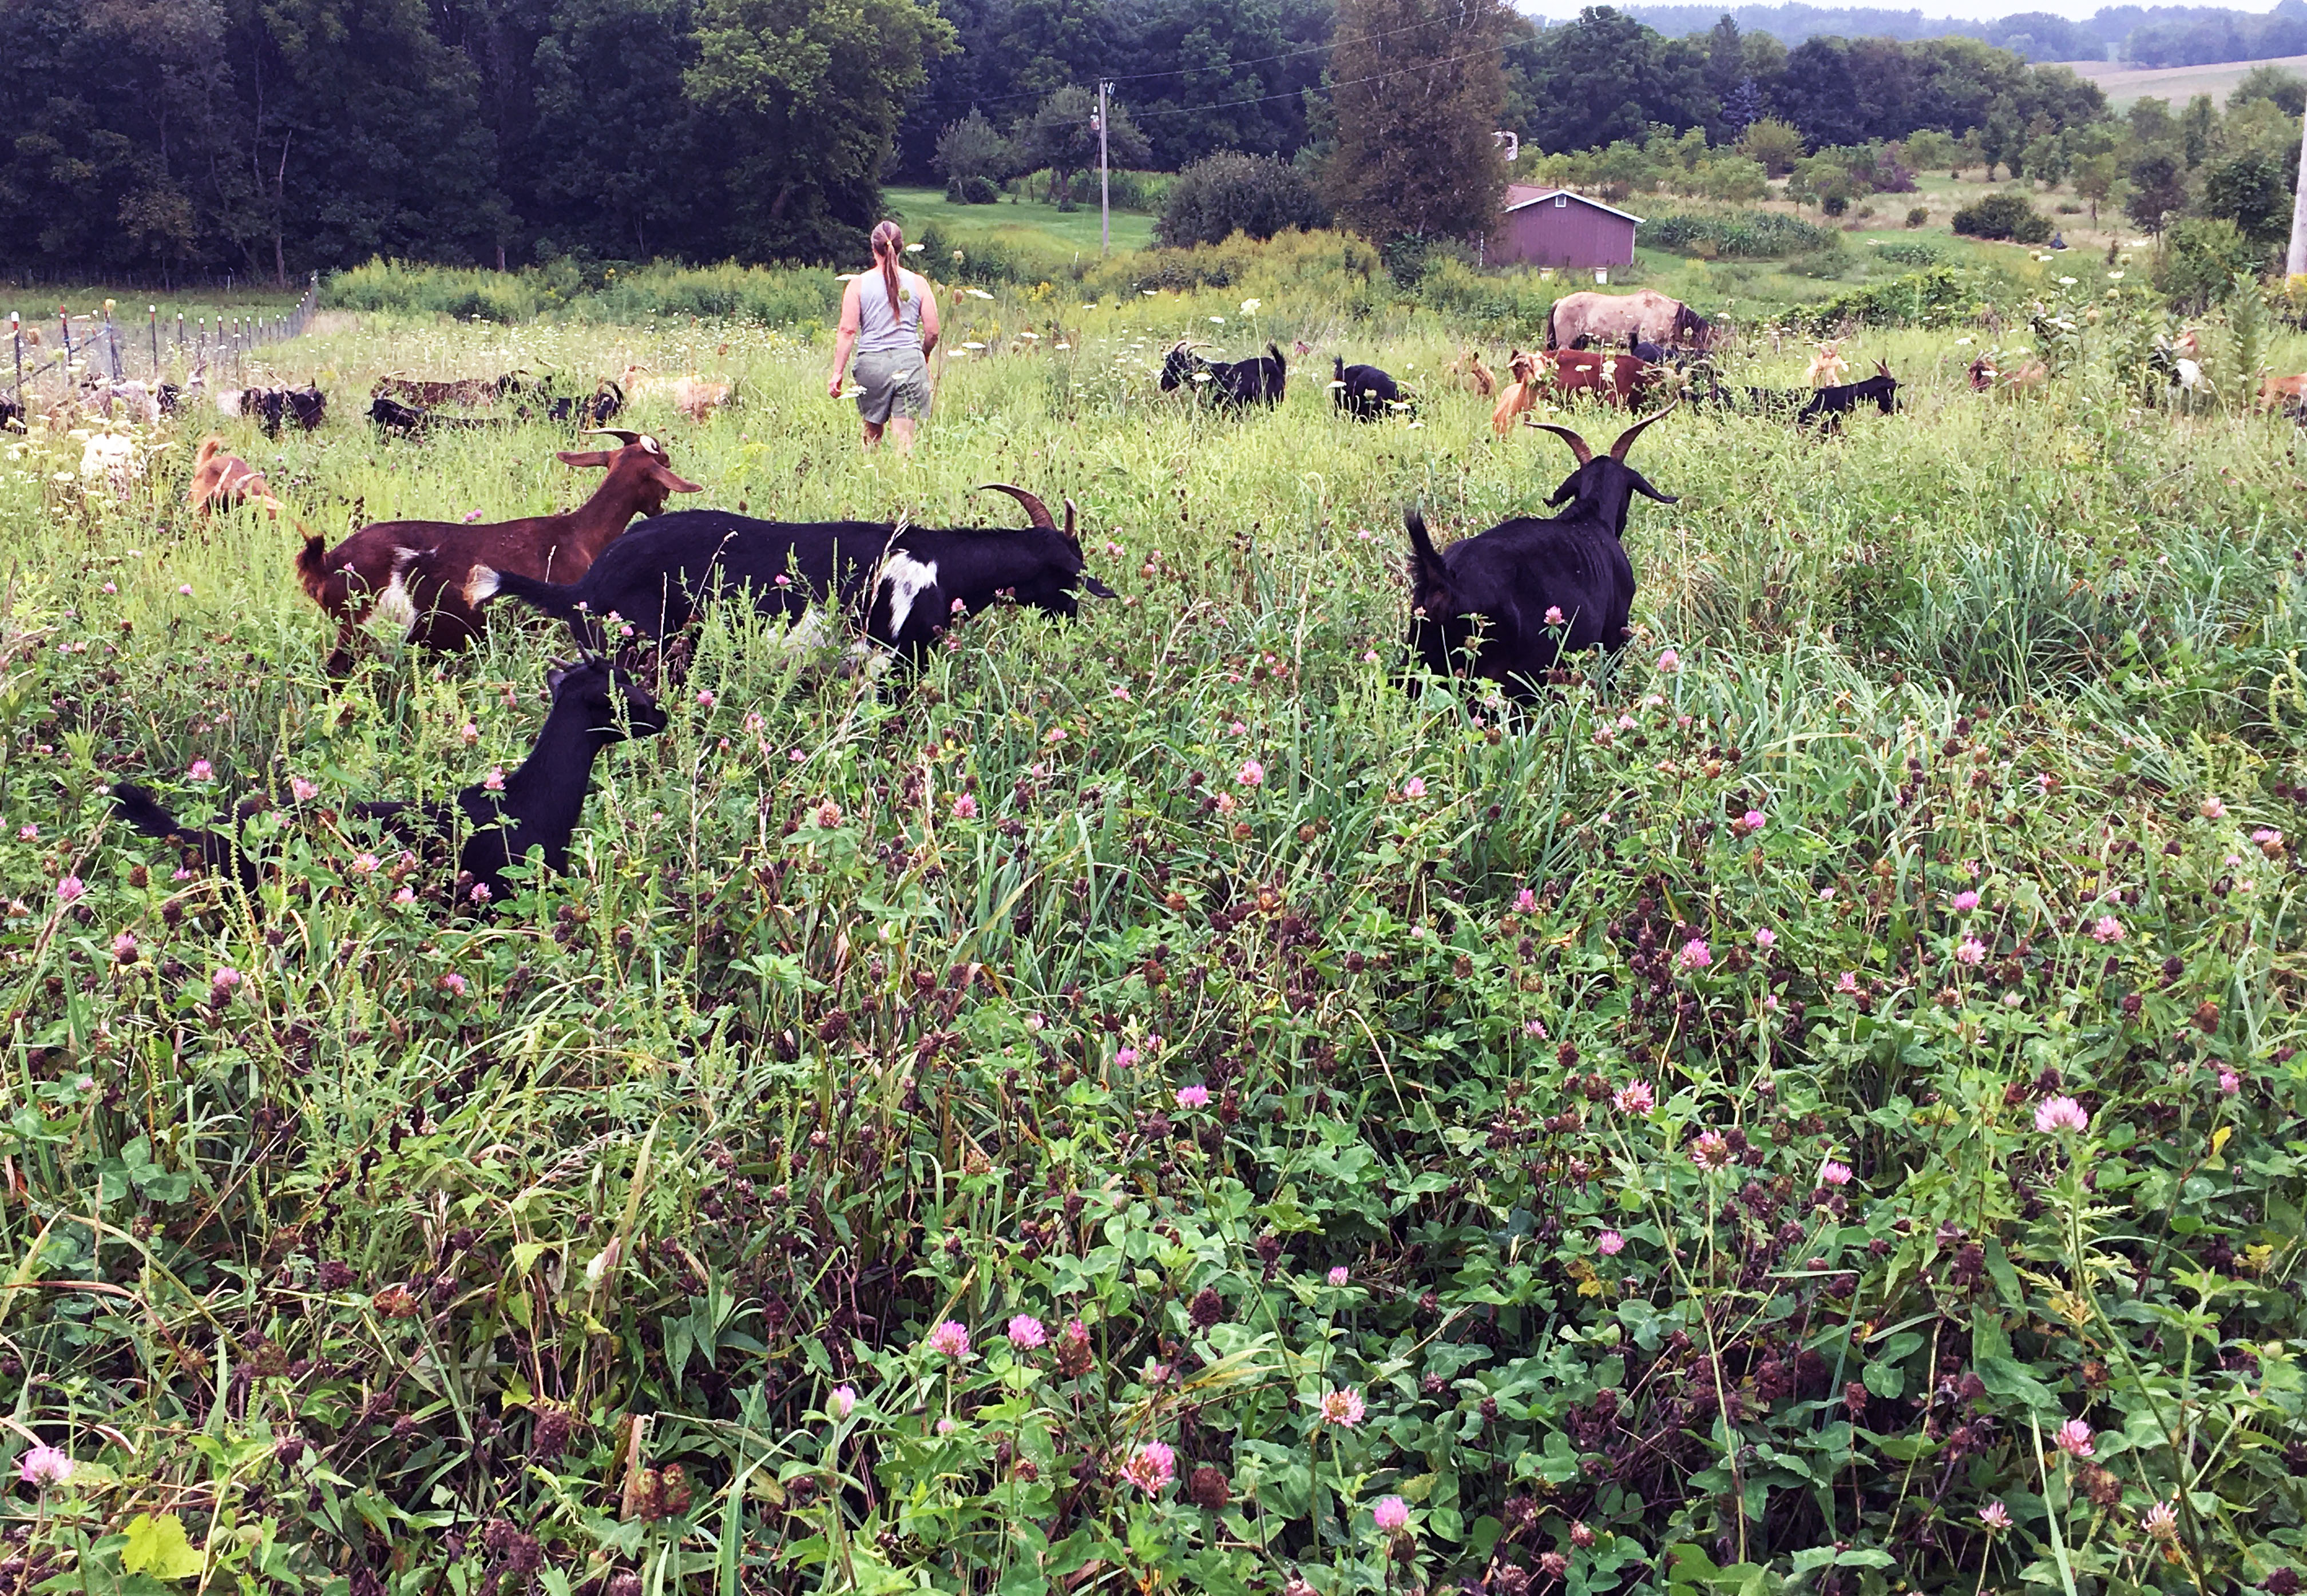 Kim Hunter, owner of target grazing company The Green Goats, is in a field in Browntown, Wisconsin, with her goats. Hunter takes her herd of goats to properties where the goats graze and cull vegetation for property owners. The method is often chosen because it’s more environmentally friendly.